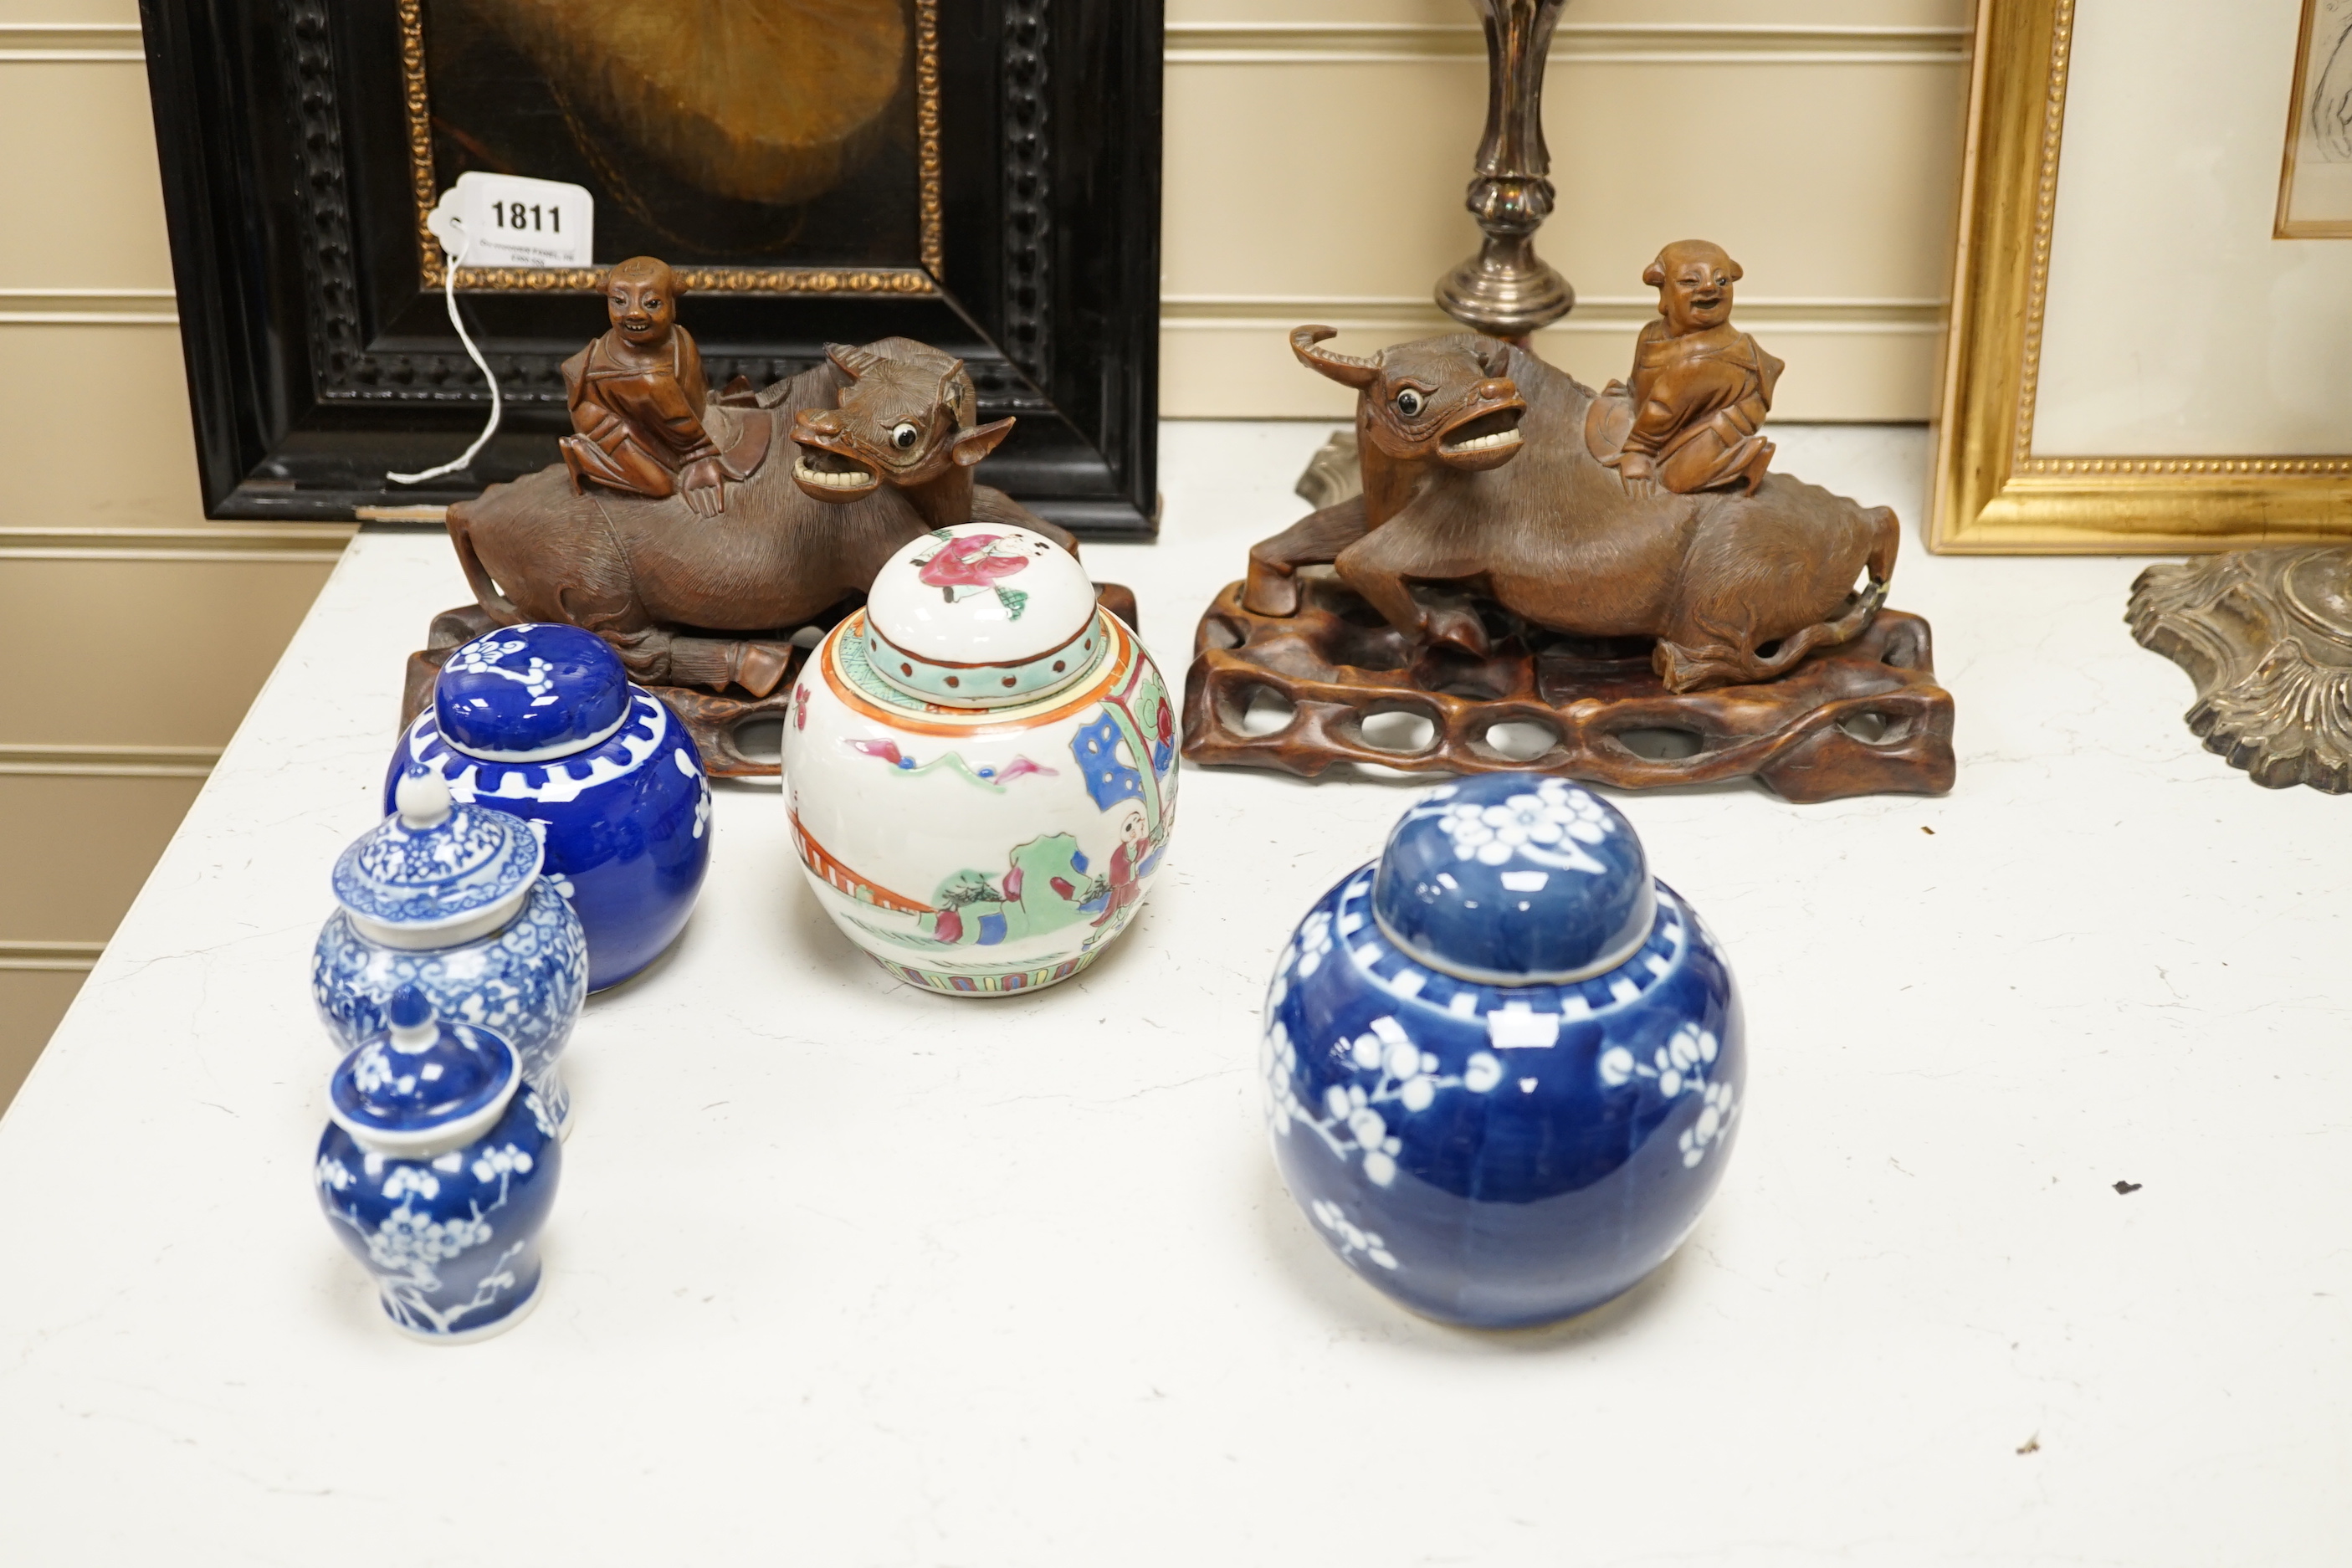 Sixteen mainly Chinese items, including small ginger jars, a pair of carved wood bulls on stands, dishes and bowls, etc.